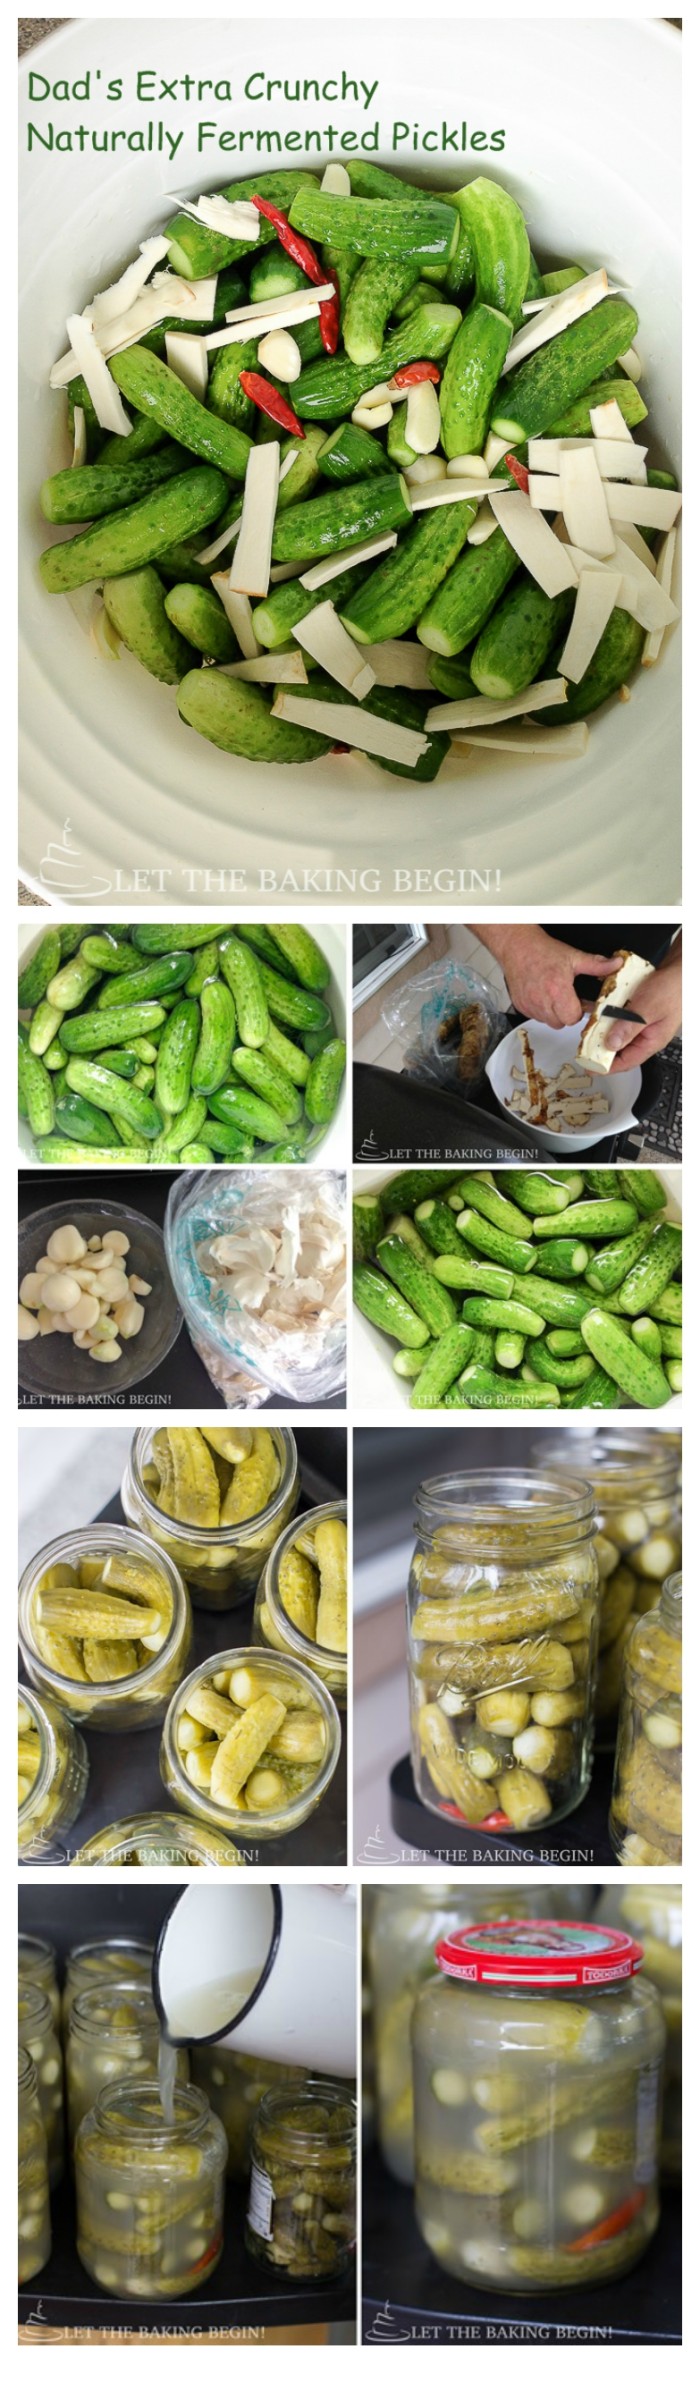 Dad's Extra Crunchy Naturally Fermented Pickles - the recipe my family has been using for decades using simple, natural ingredients that will give you that authentic perfectly fermented crunchy pickle.